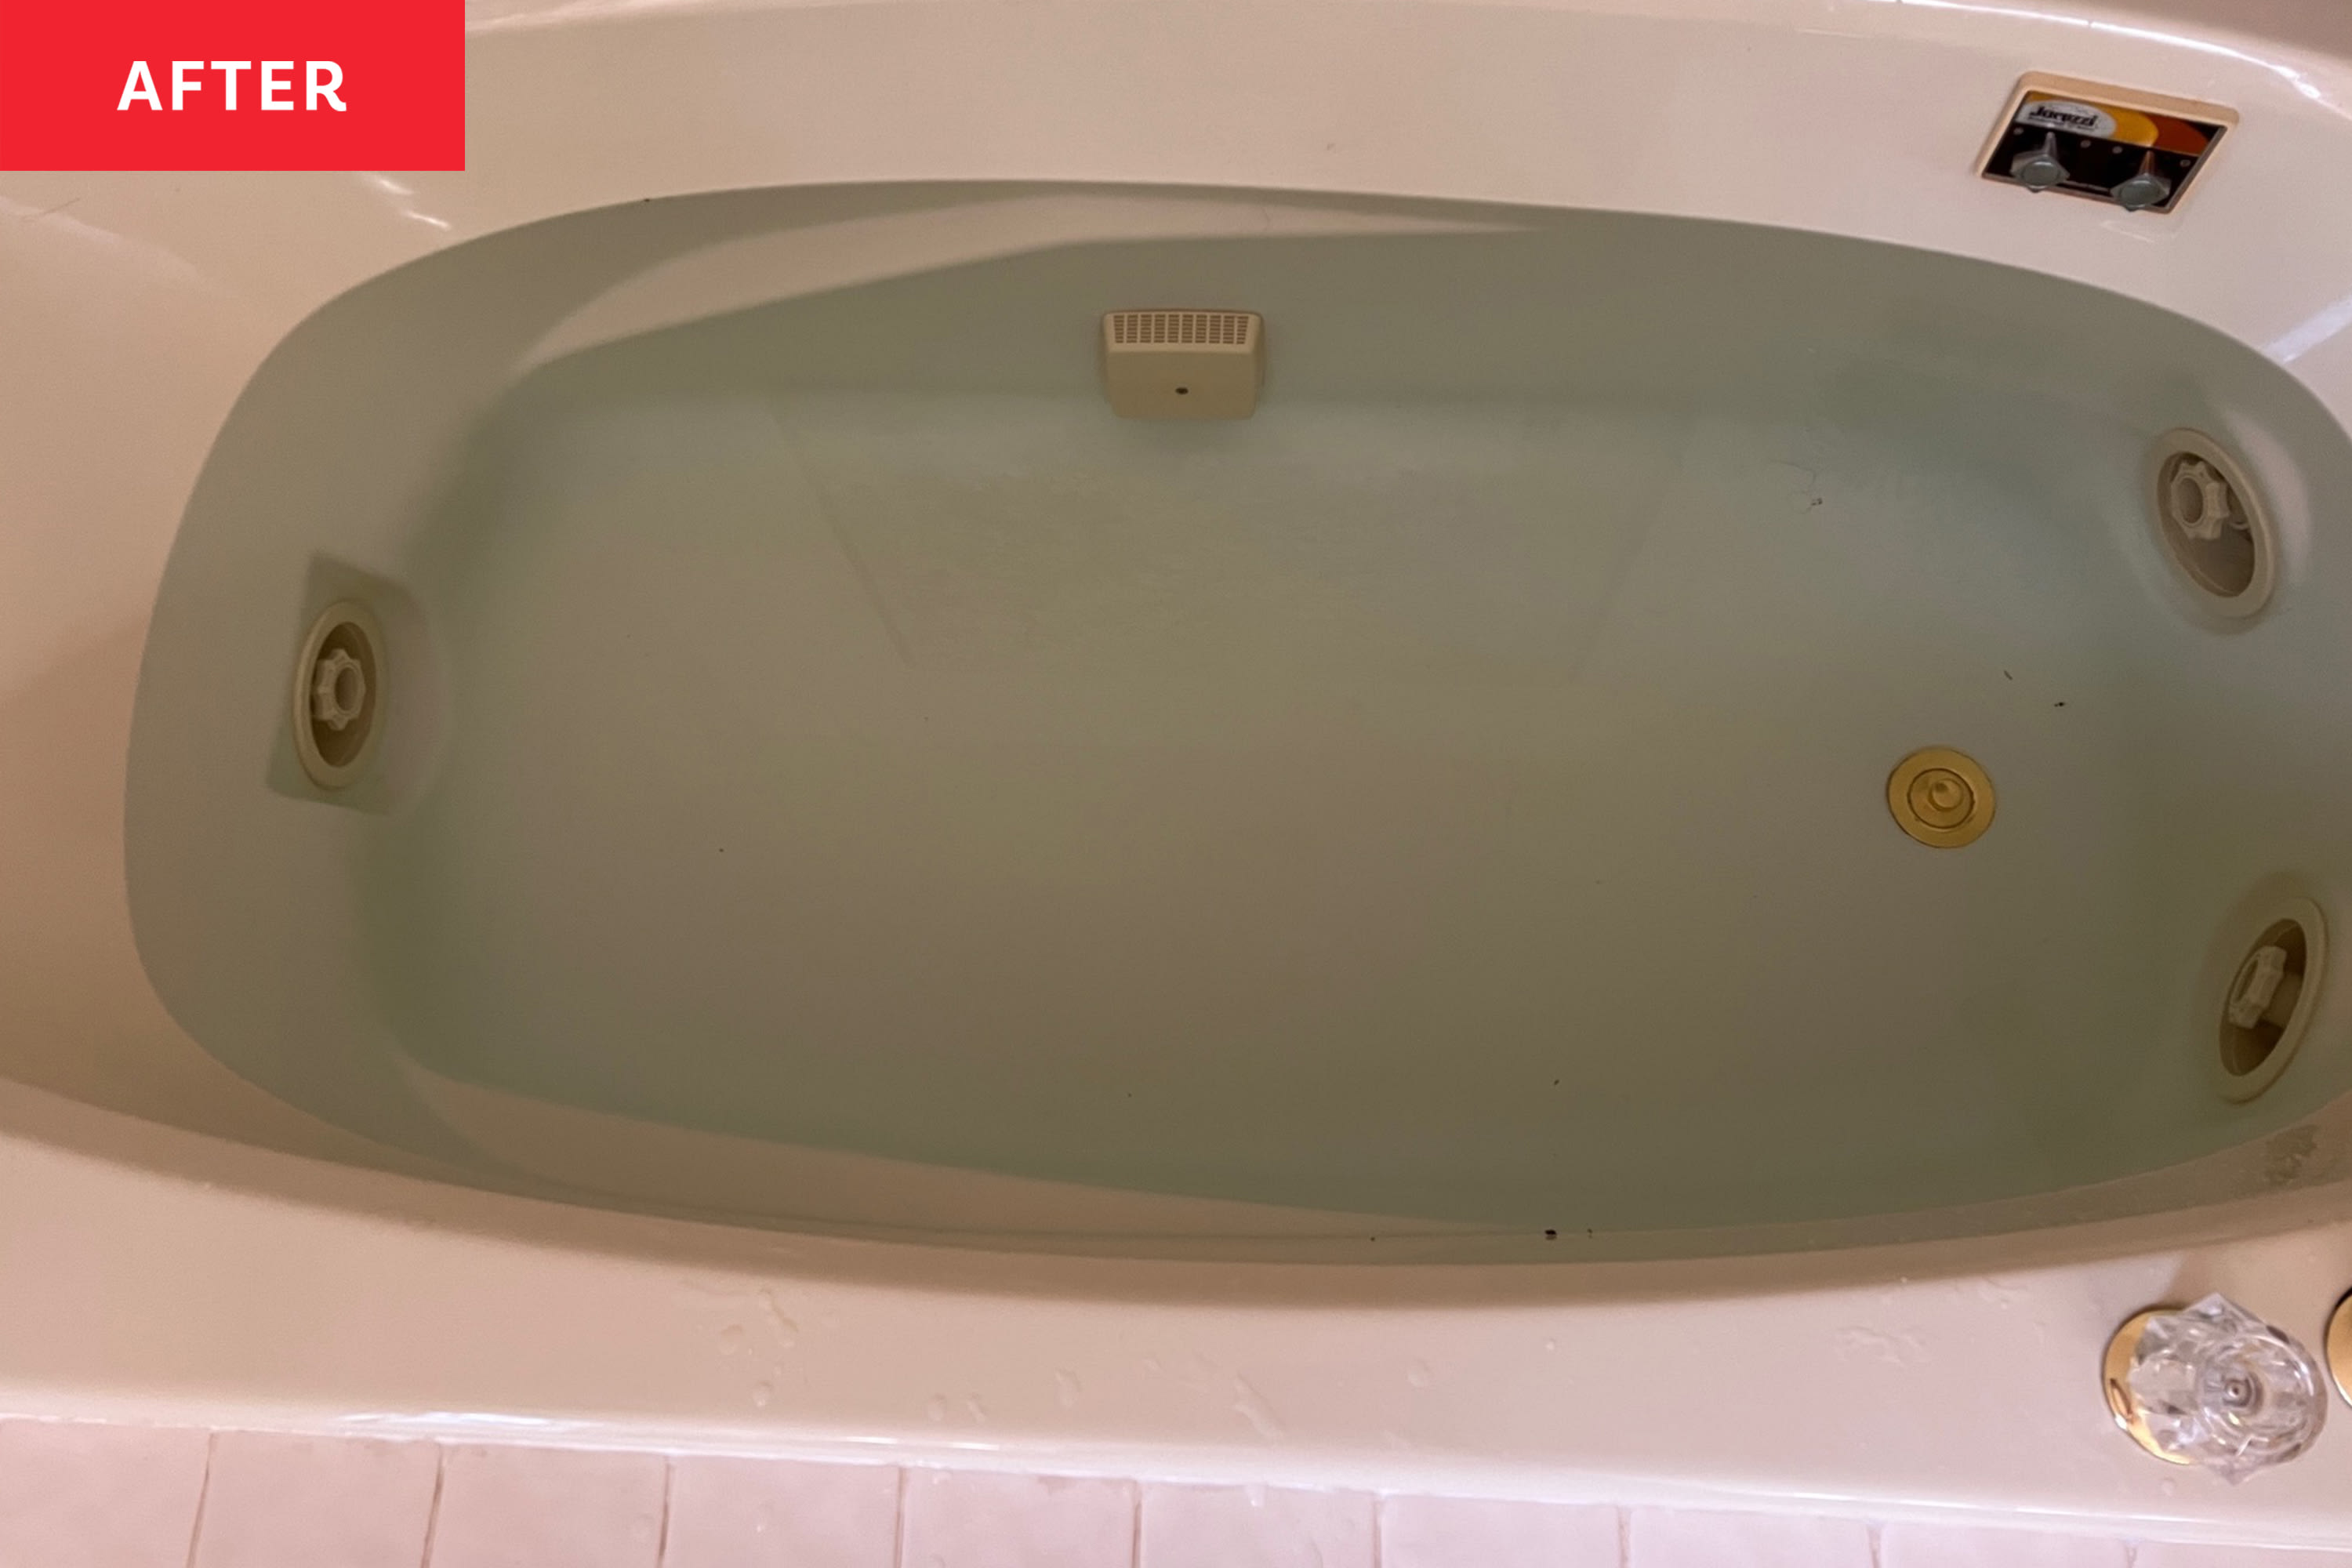 How to Clean a Jetted Tub Easily